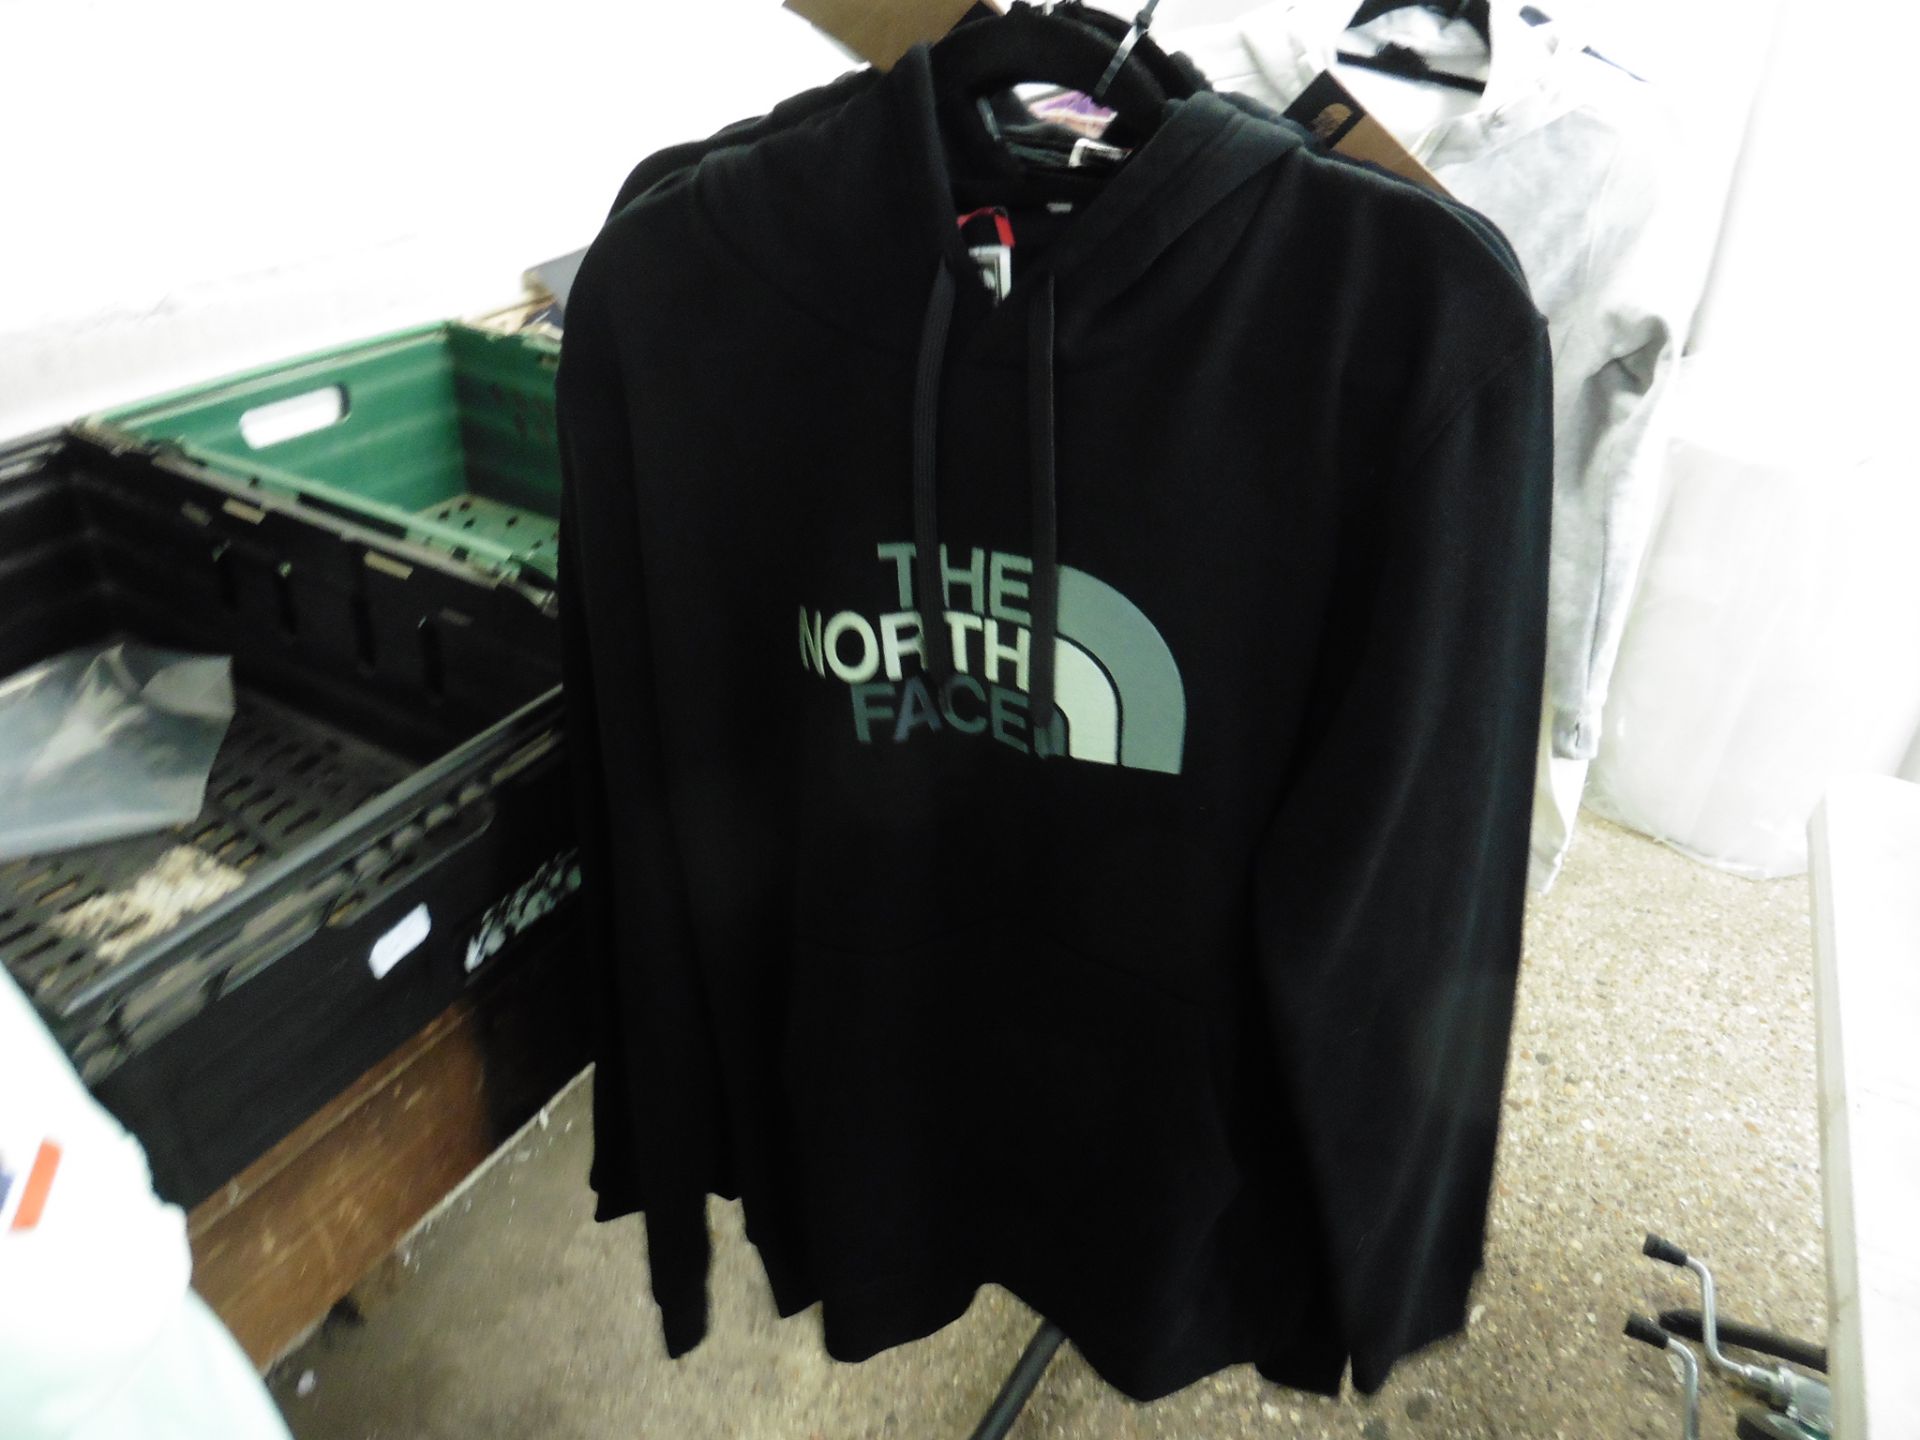 5 Northface hoodies in assorted sizes